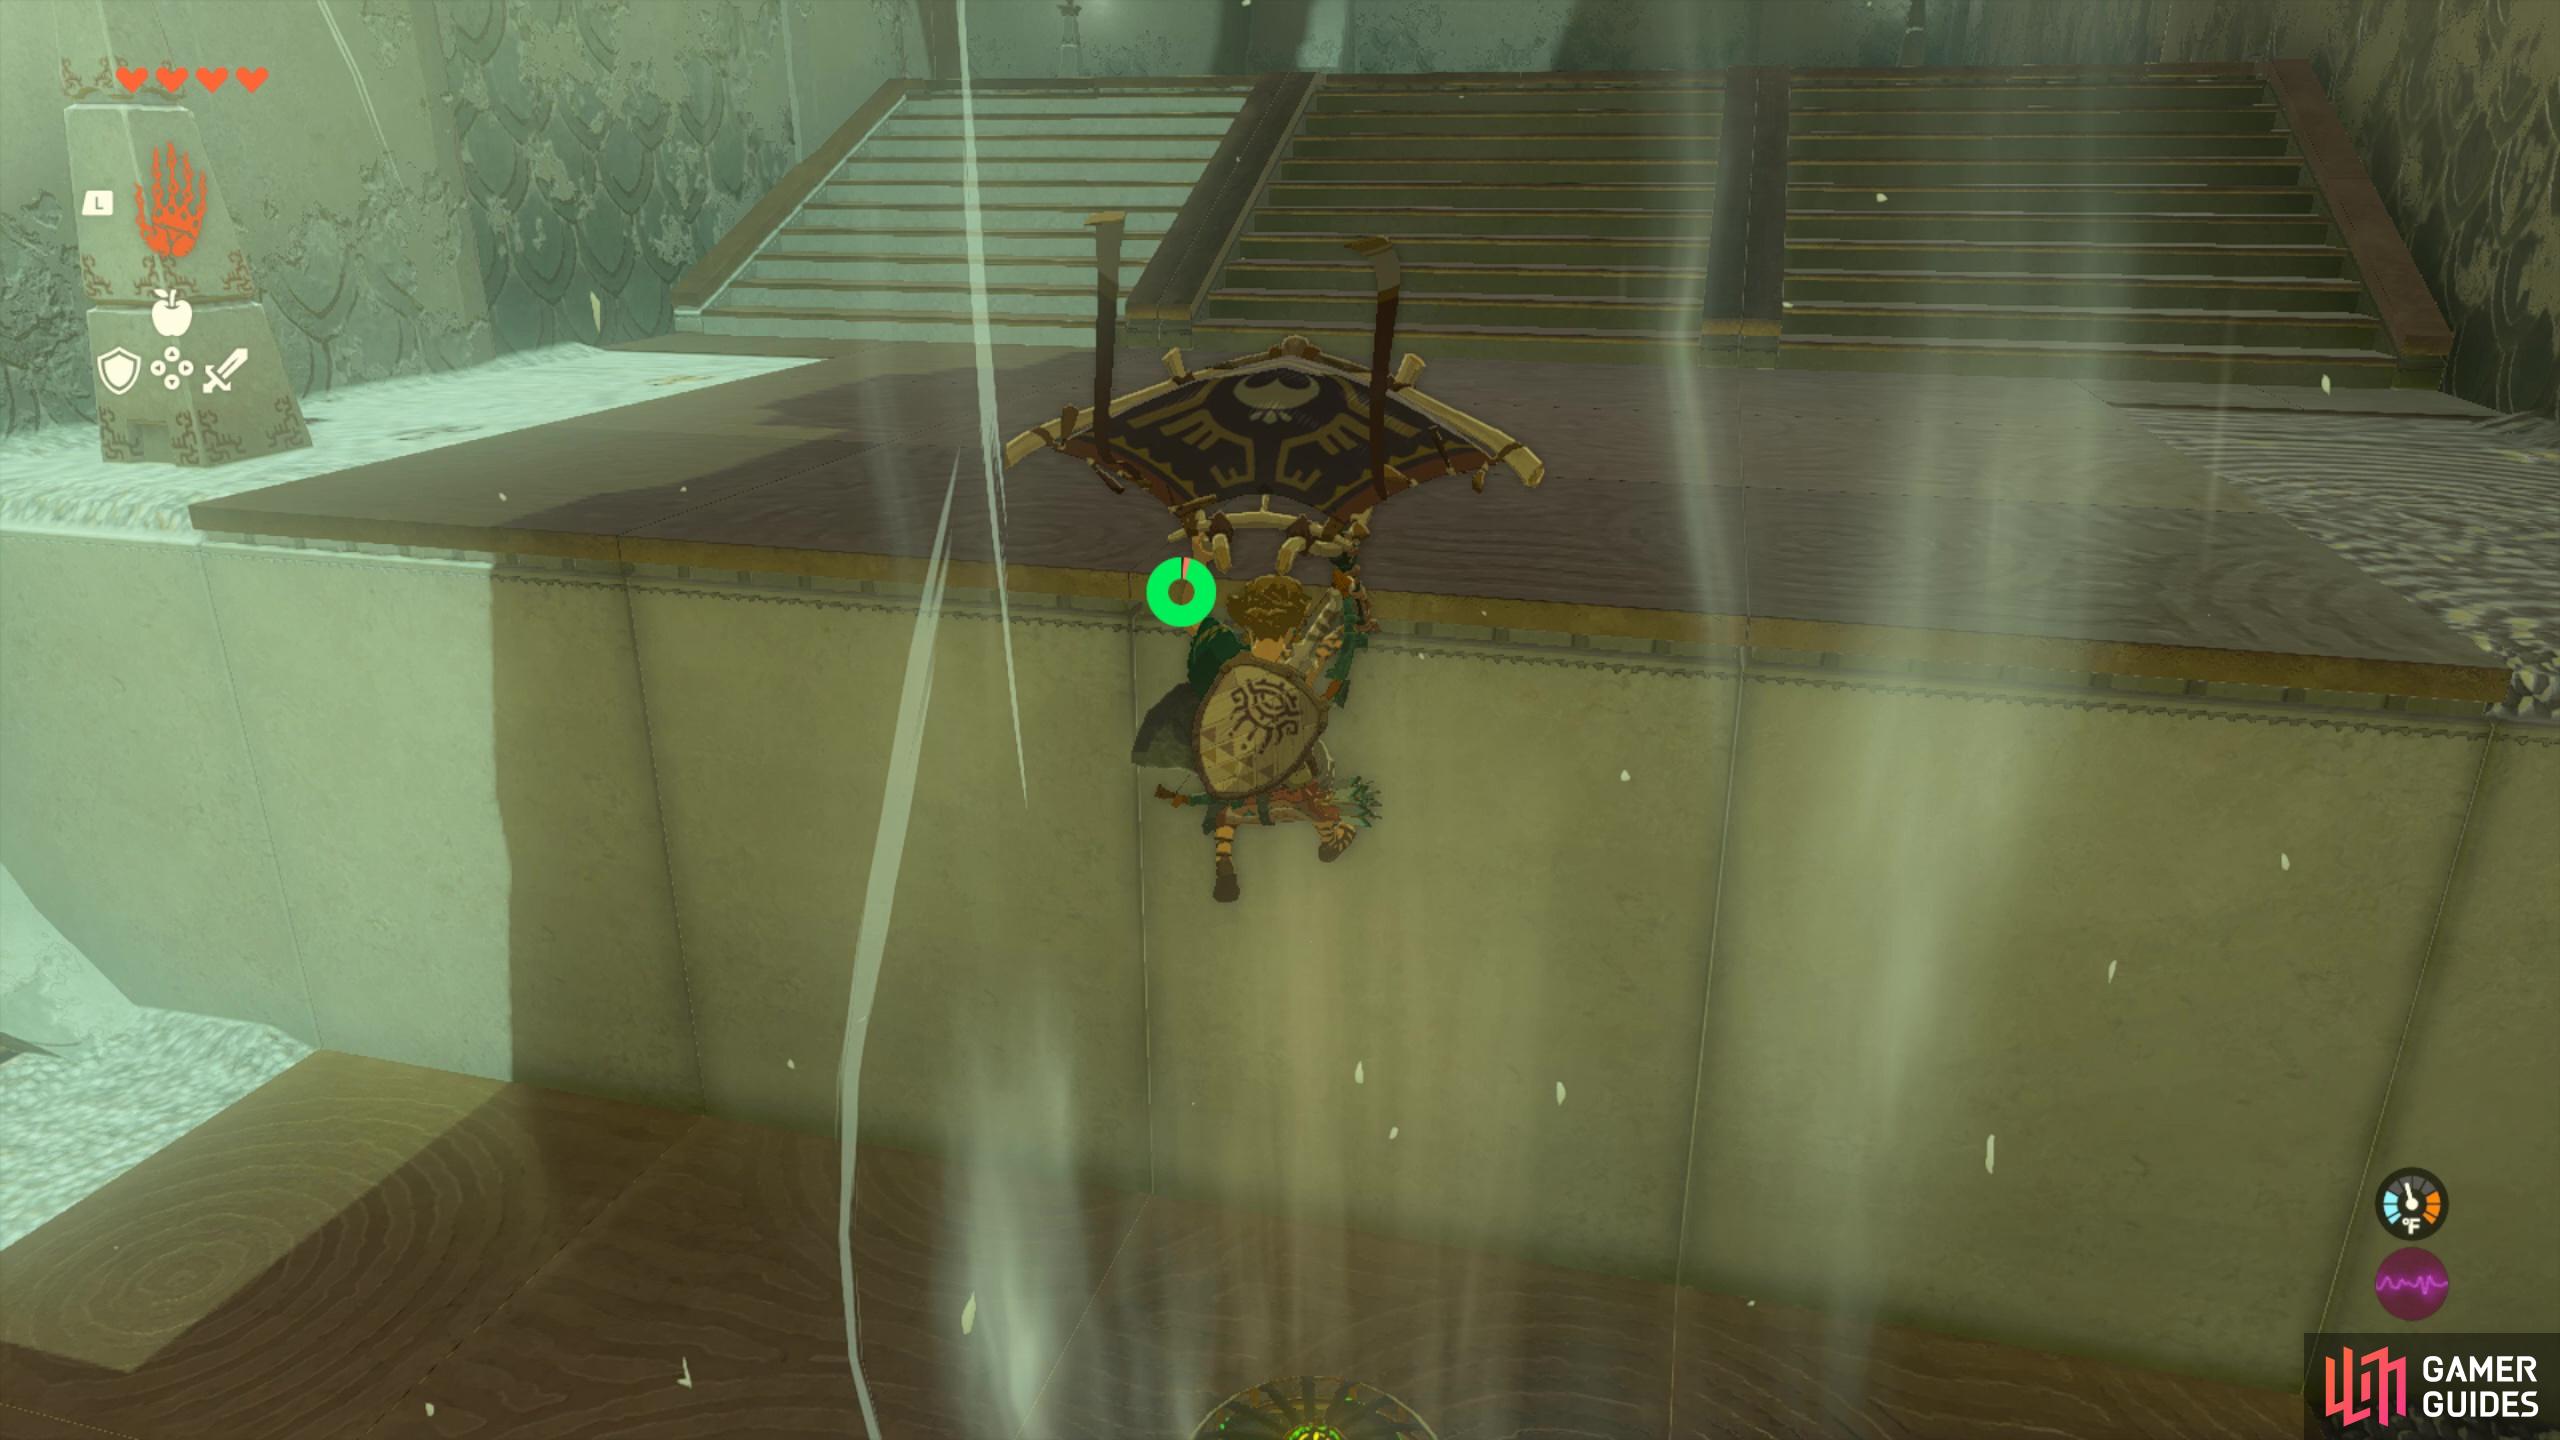 In Ishodag Shrine, for example, you’ll need to use the fan’s gust of wind to progress!